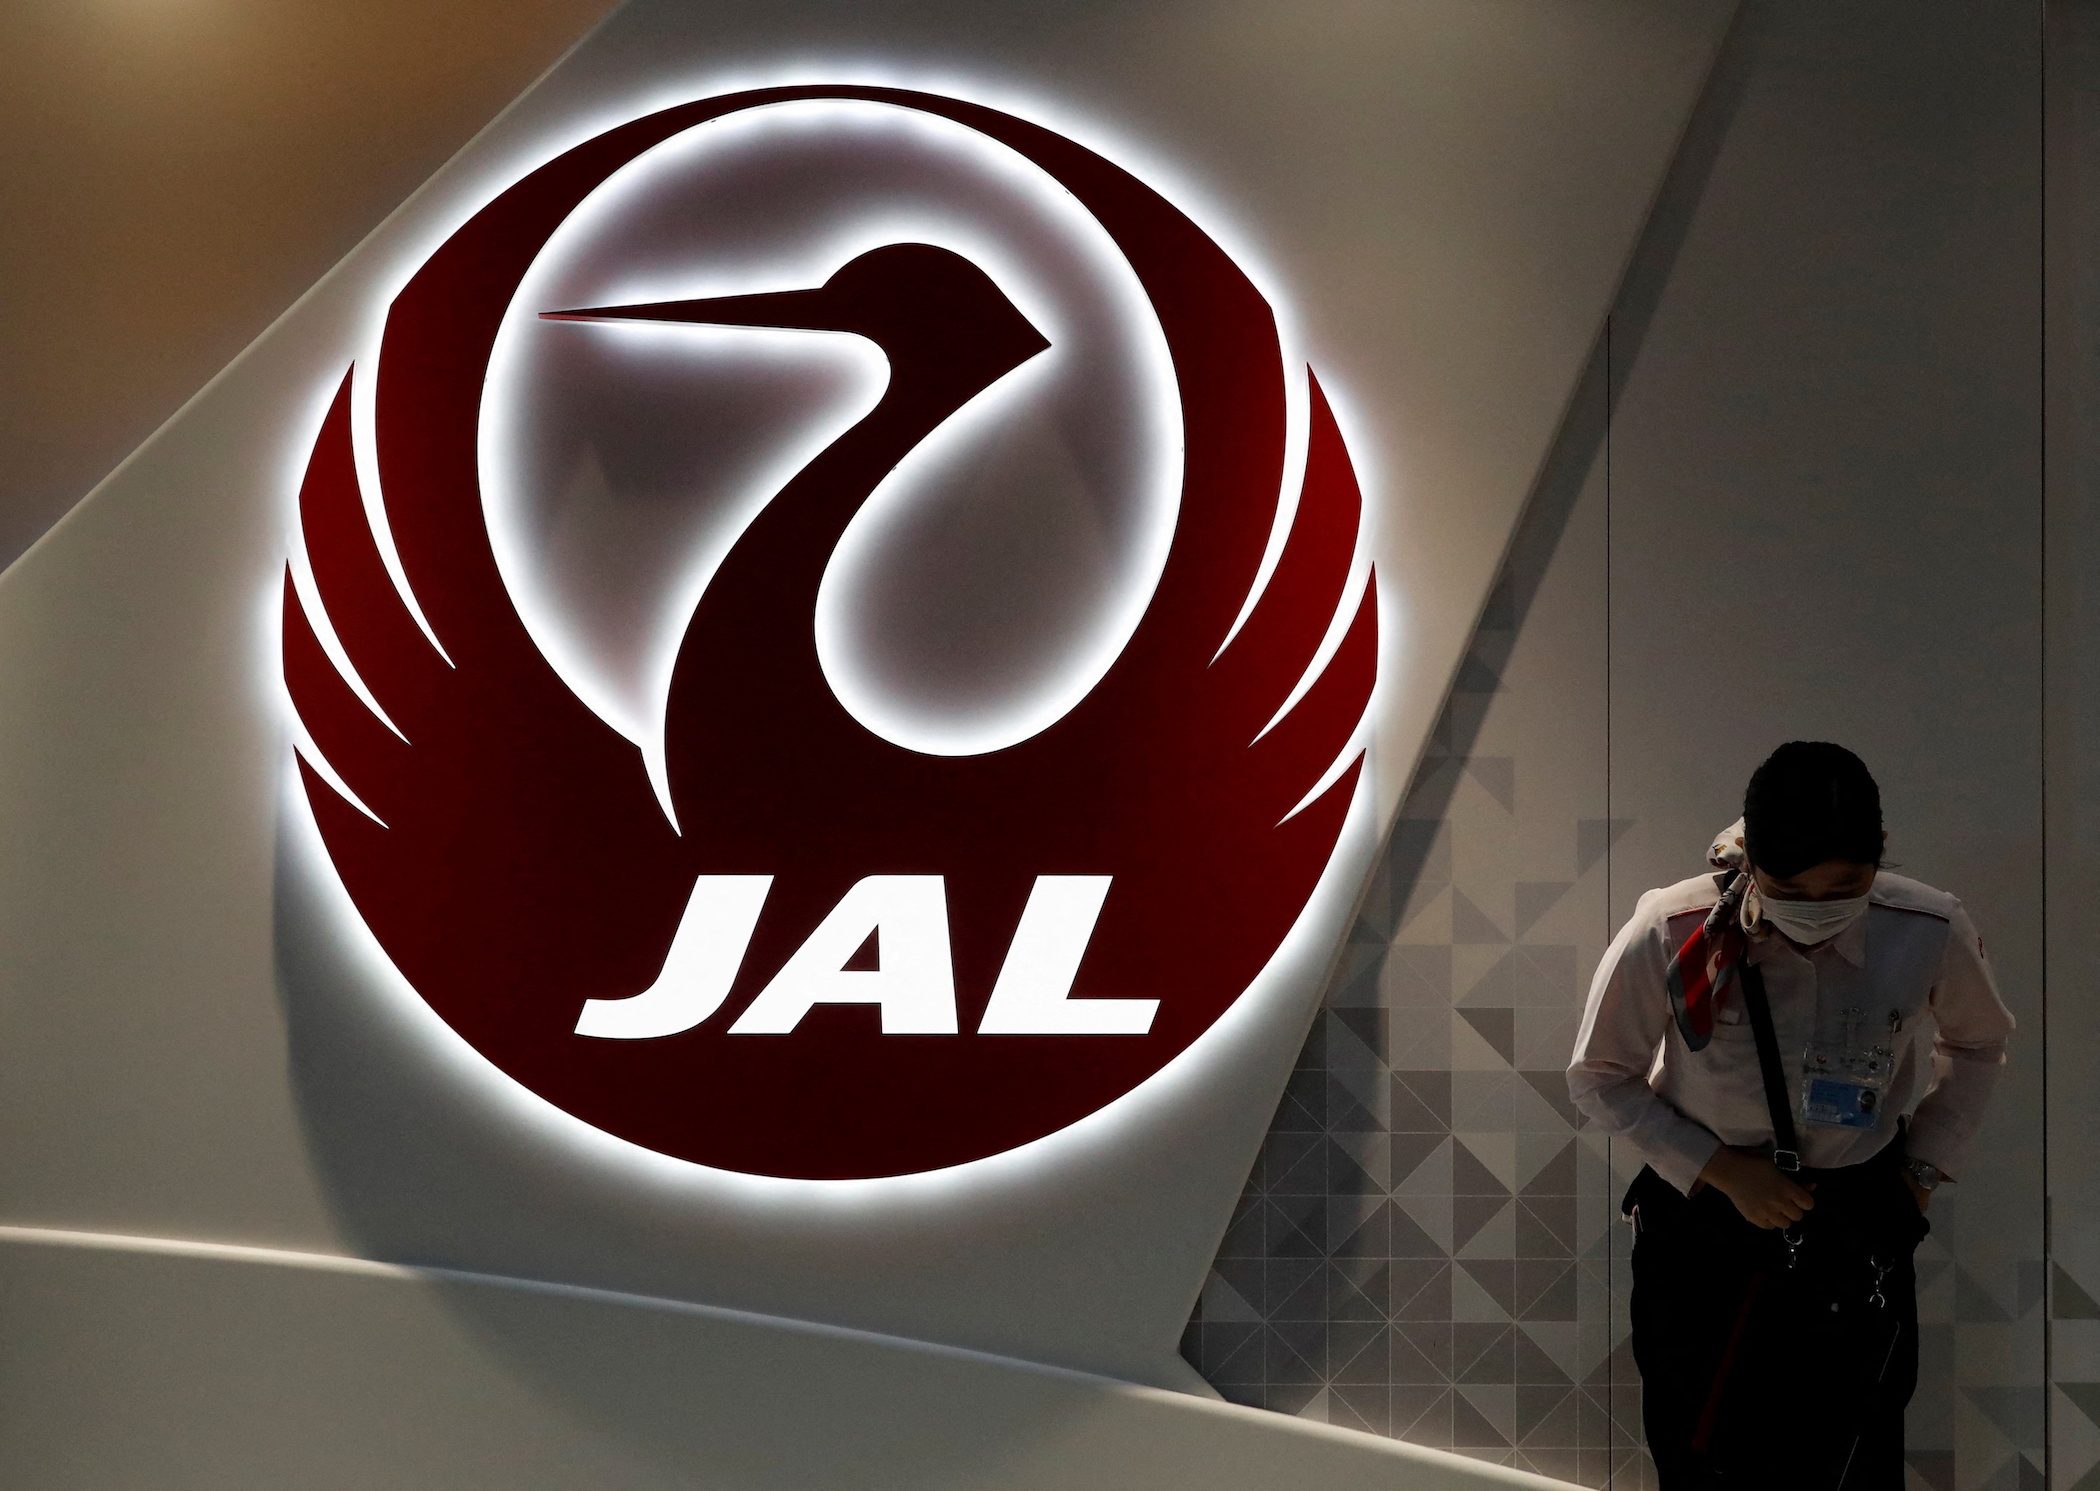 Japan’s JAL, ANA cancel or reroute Europe flights due to Ukraine crisis